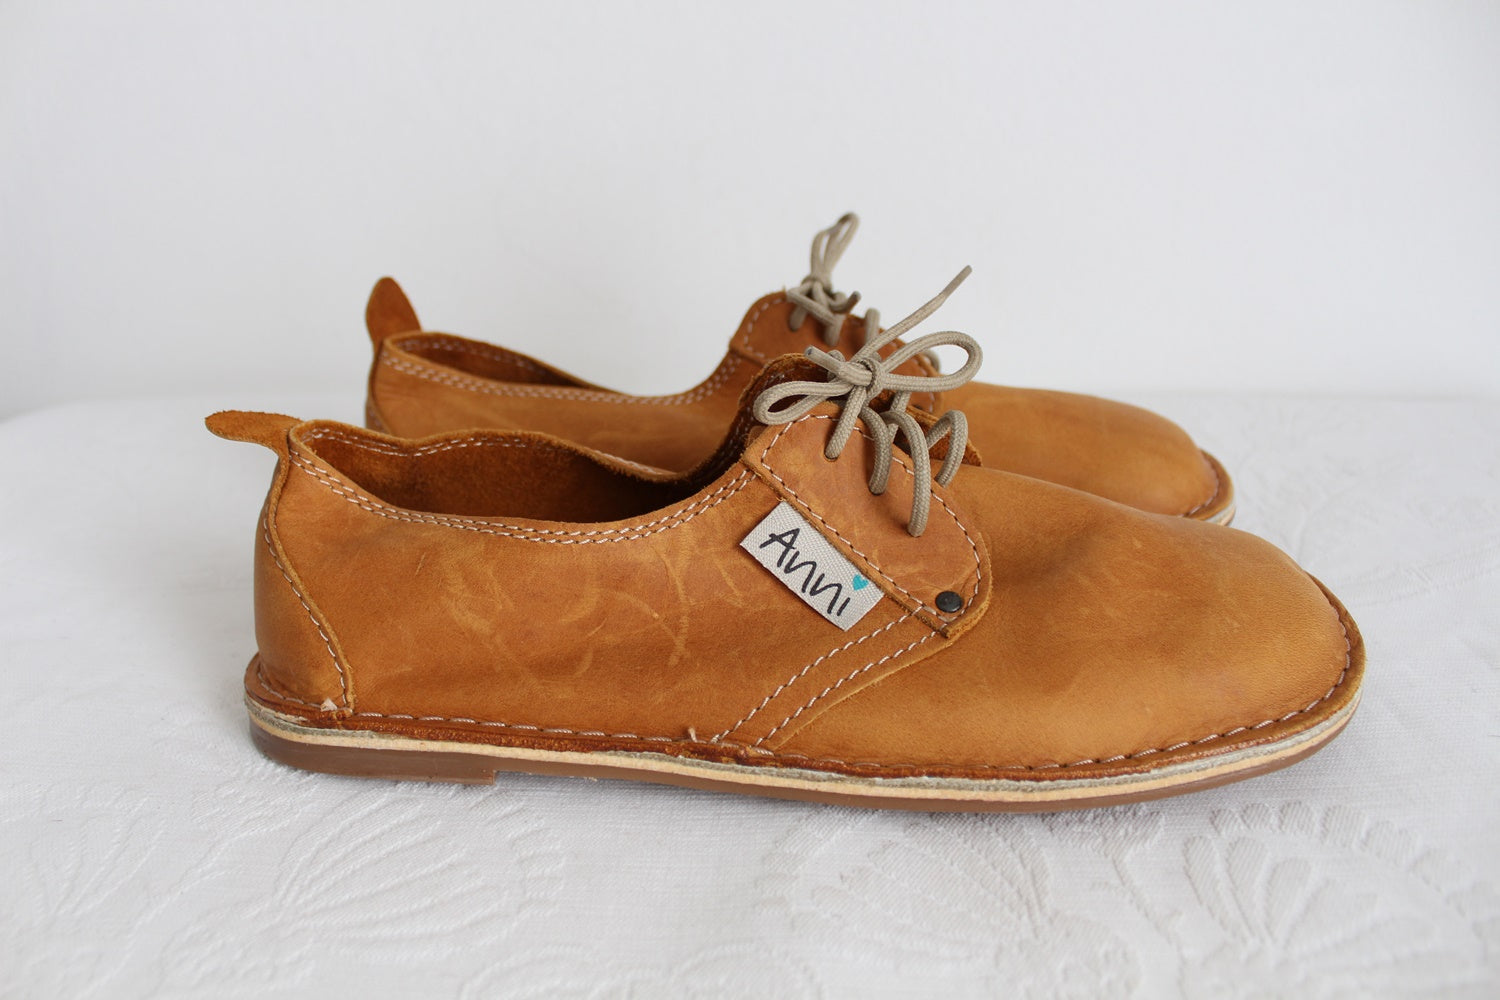 NEW ANNI GENUINE LEATHER VELLIES - SIZE 9